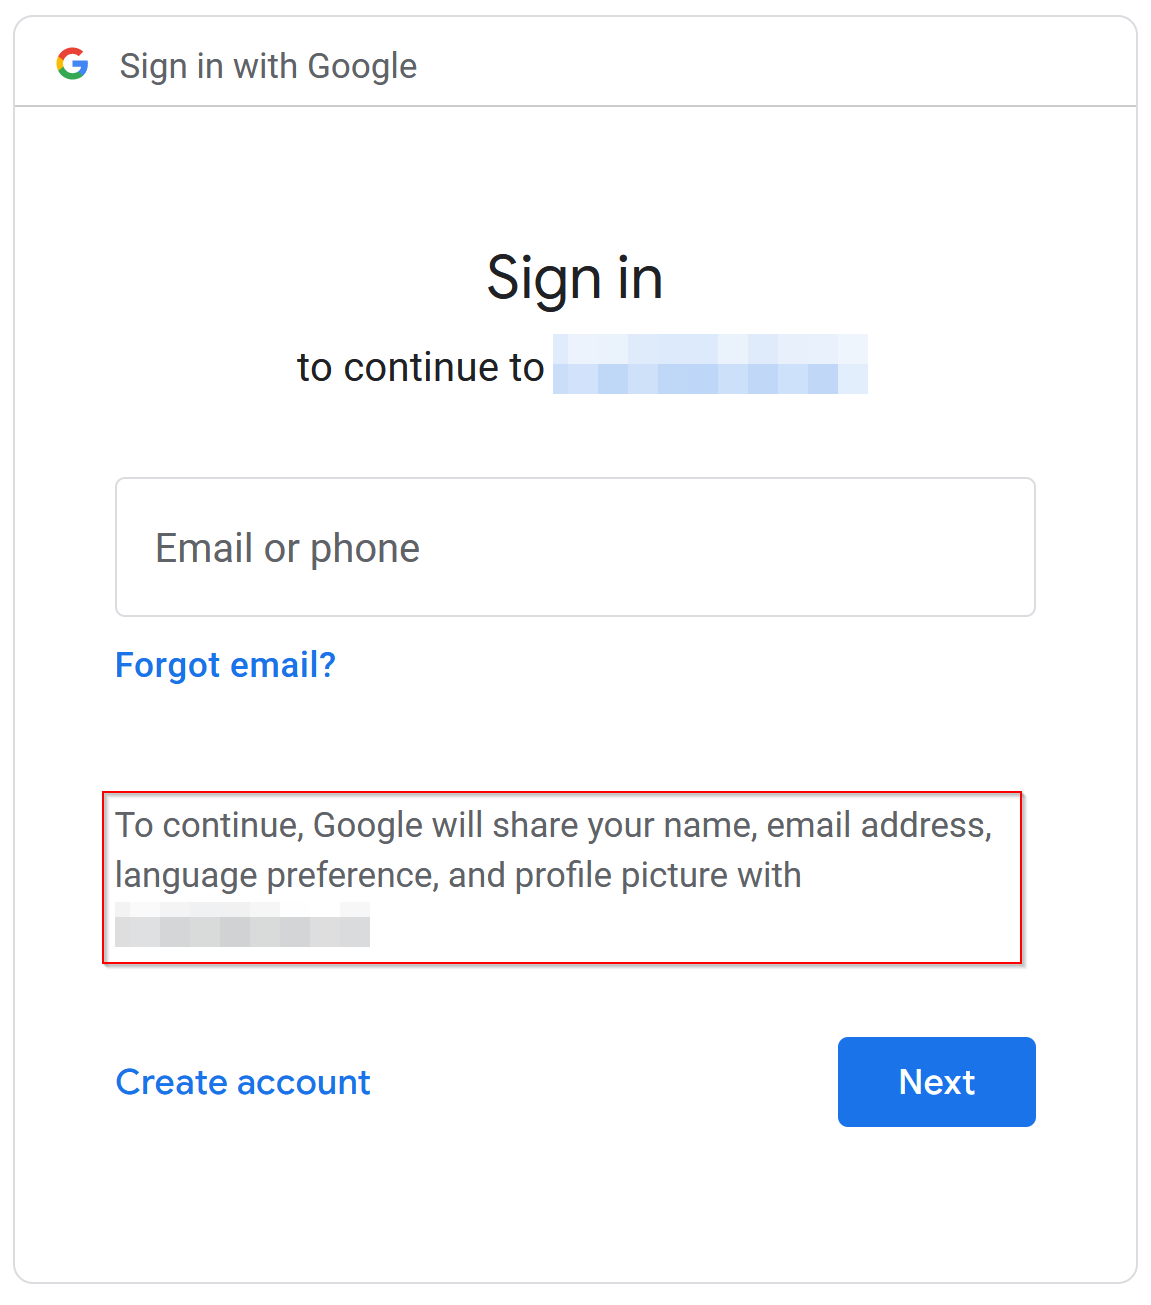 Google external sign in request example